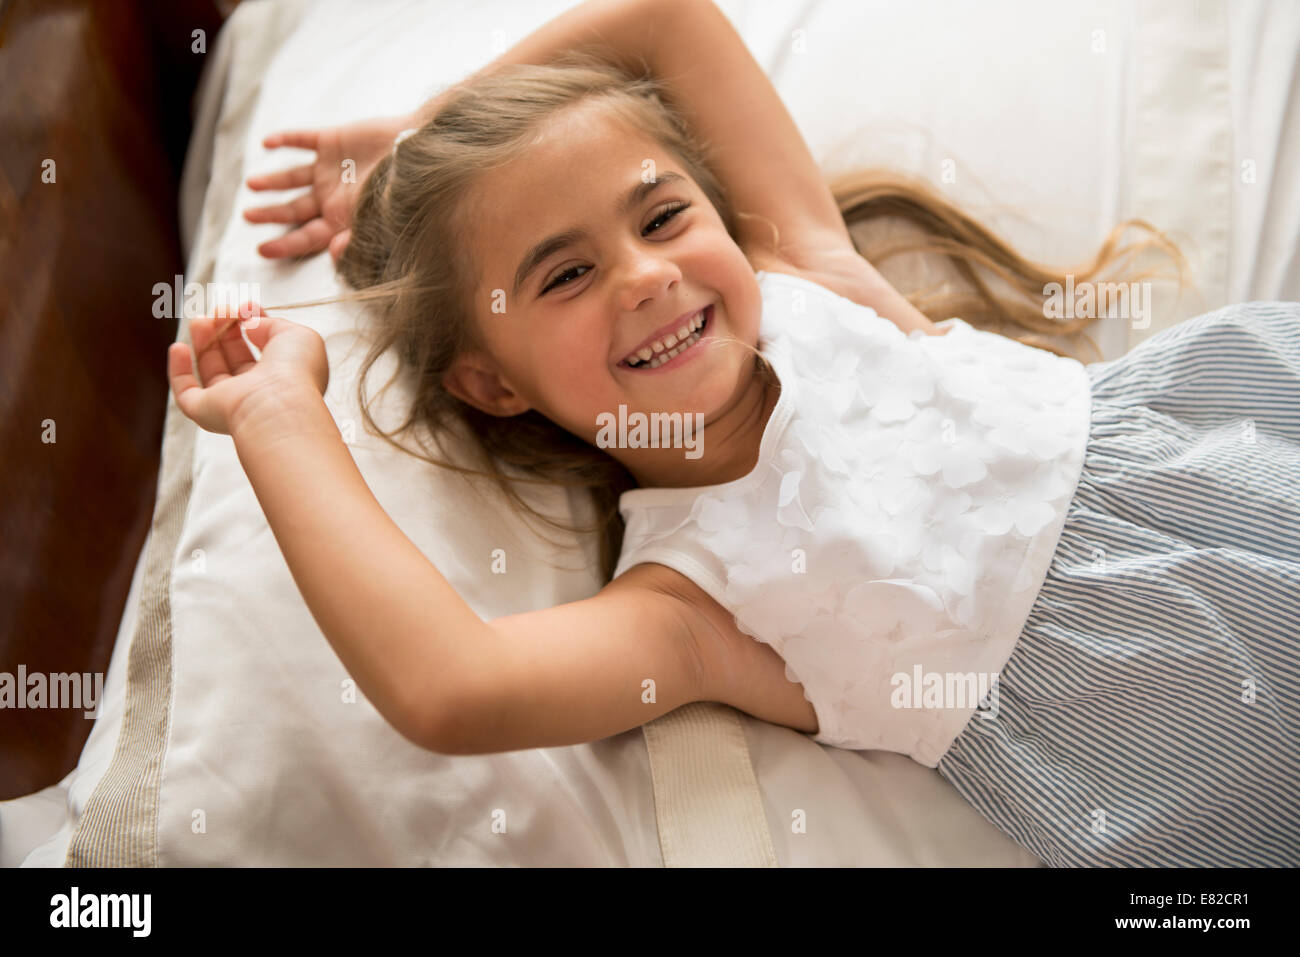 A young girl looking at the camera, smiling. Stock Photo